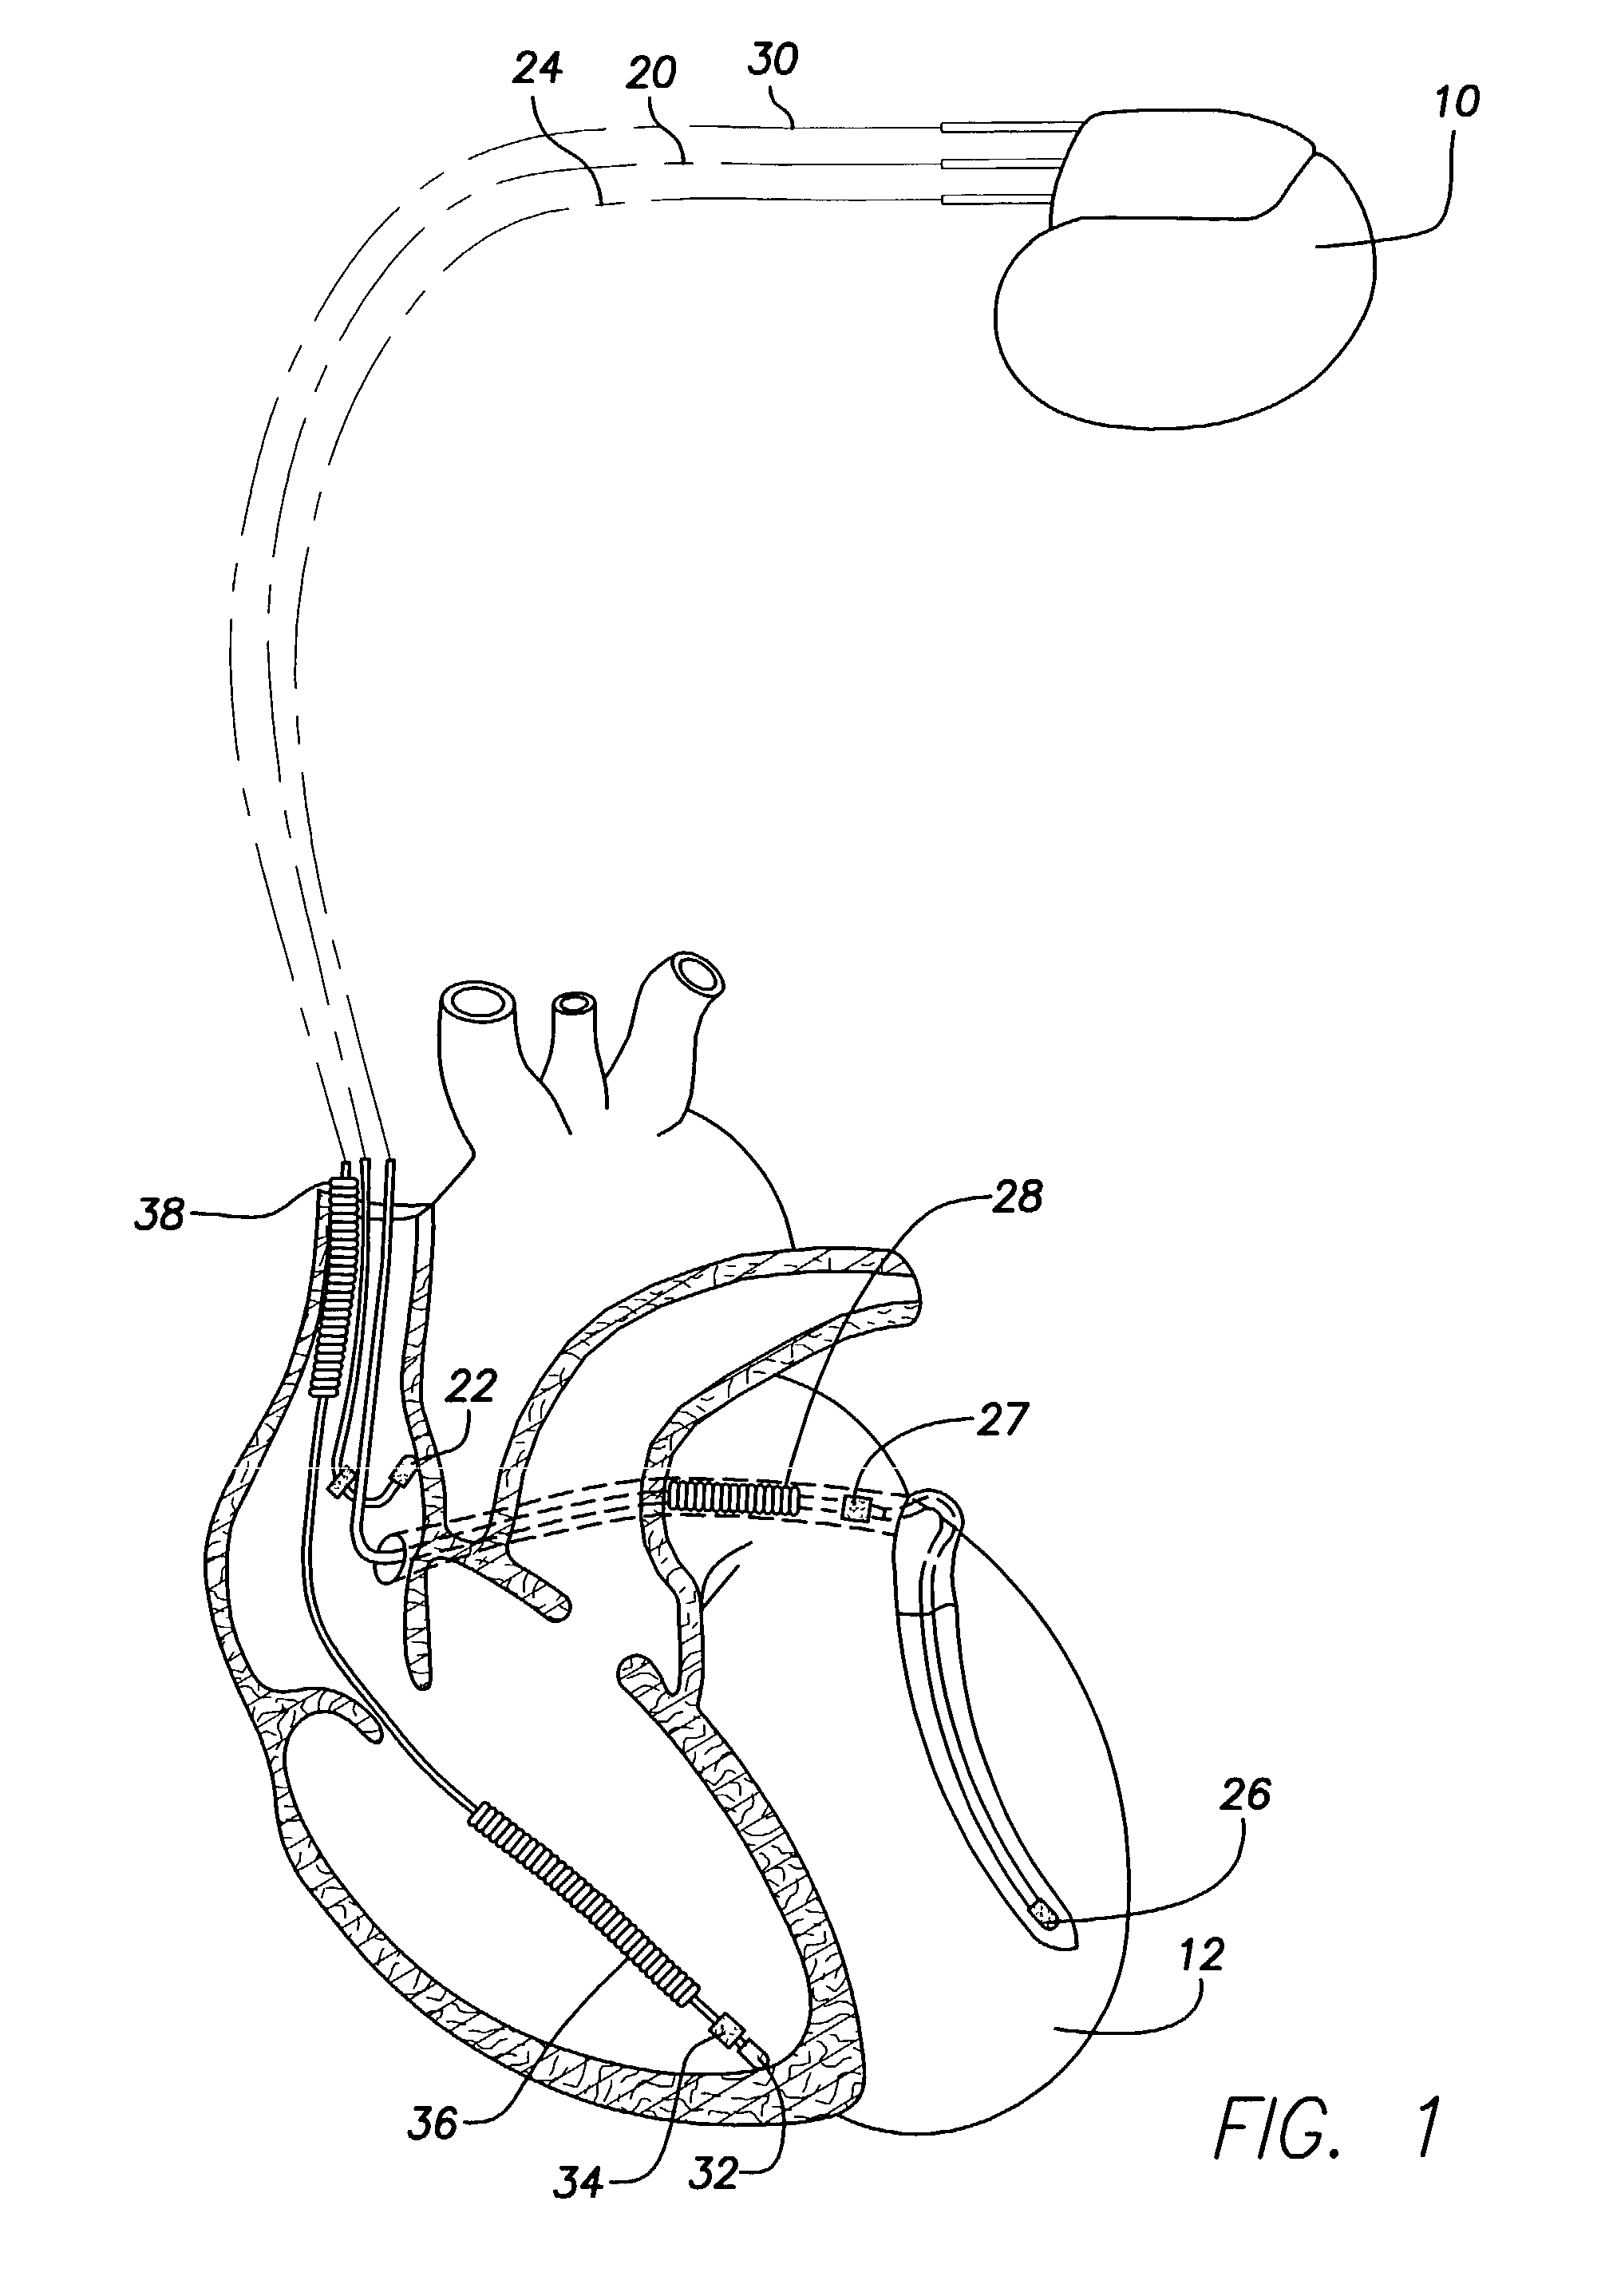 System and method for treating abnormal ventricular activation-recovery time